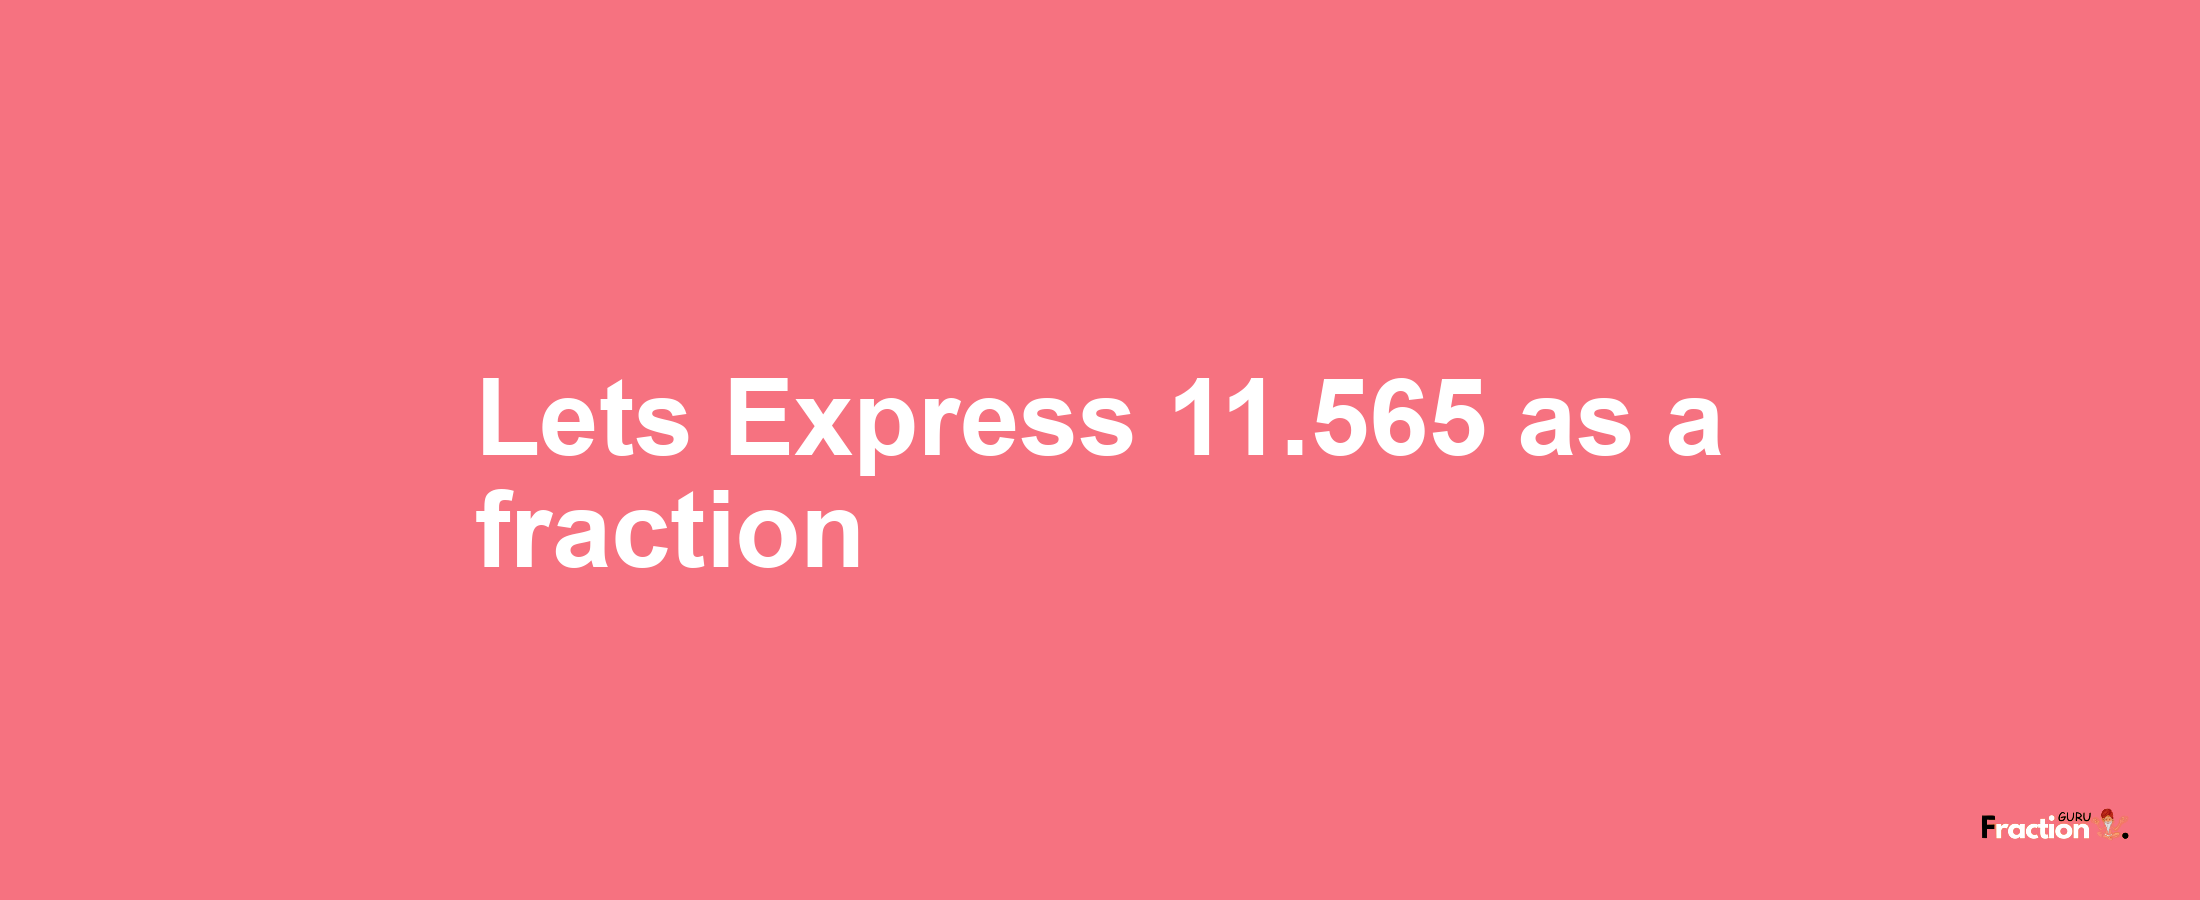 Lets Express 11.565 as afraction